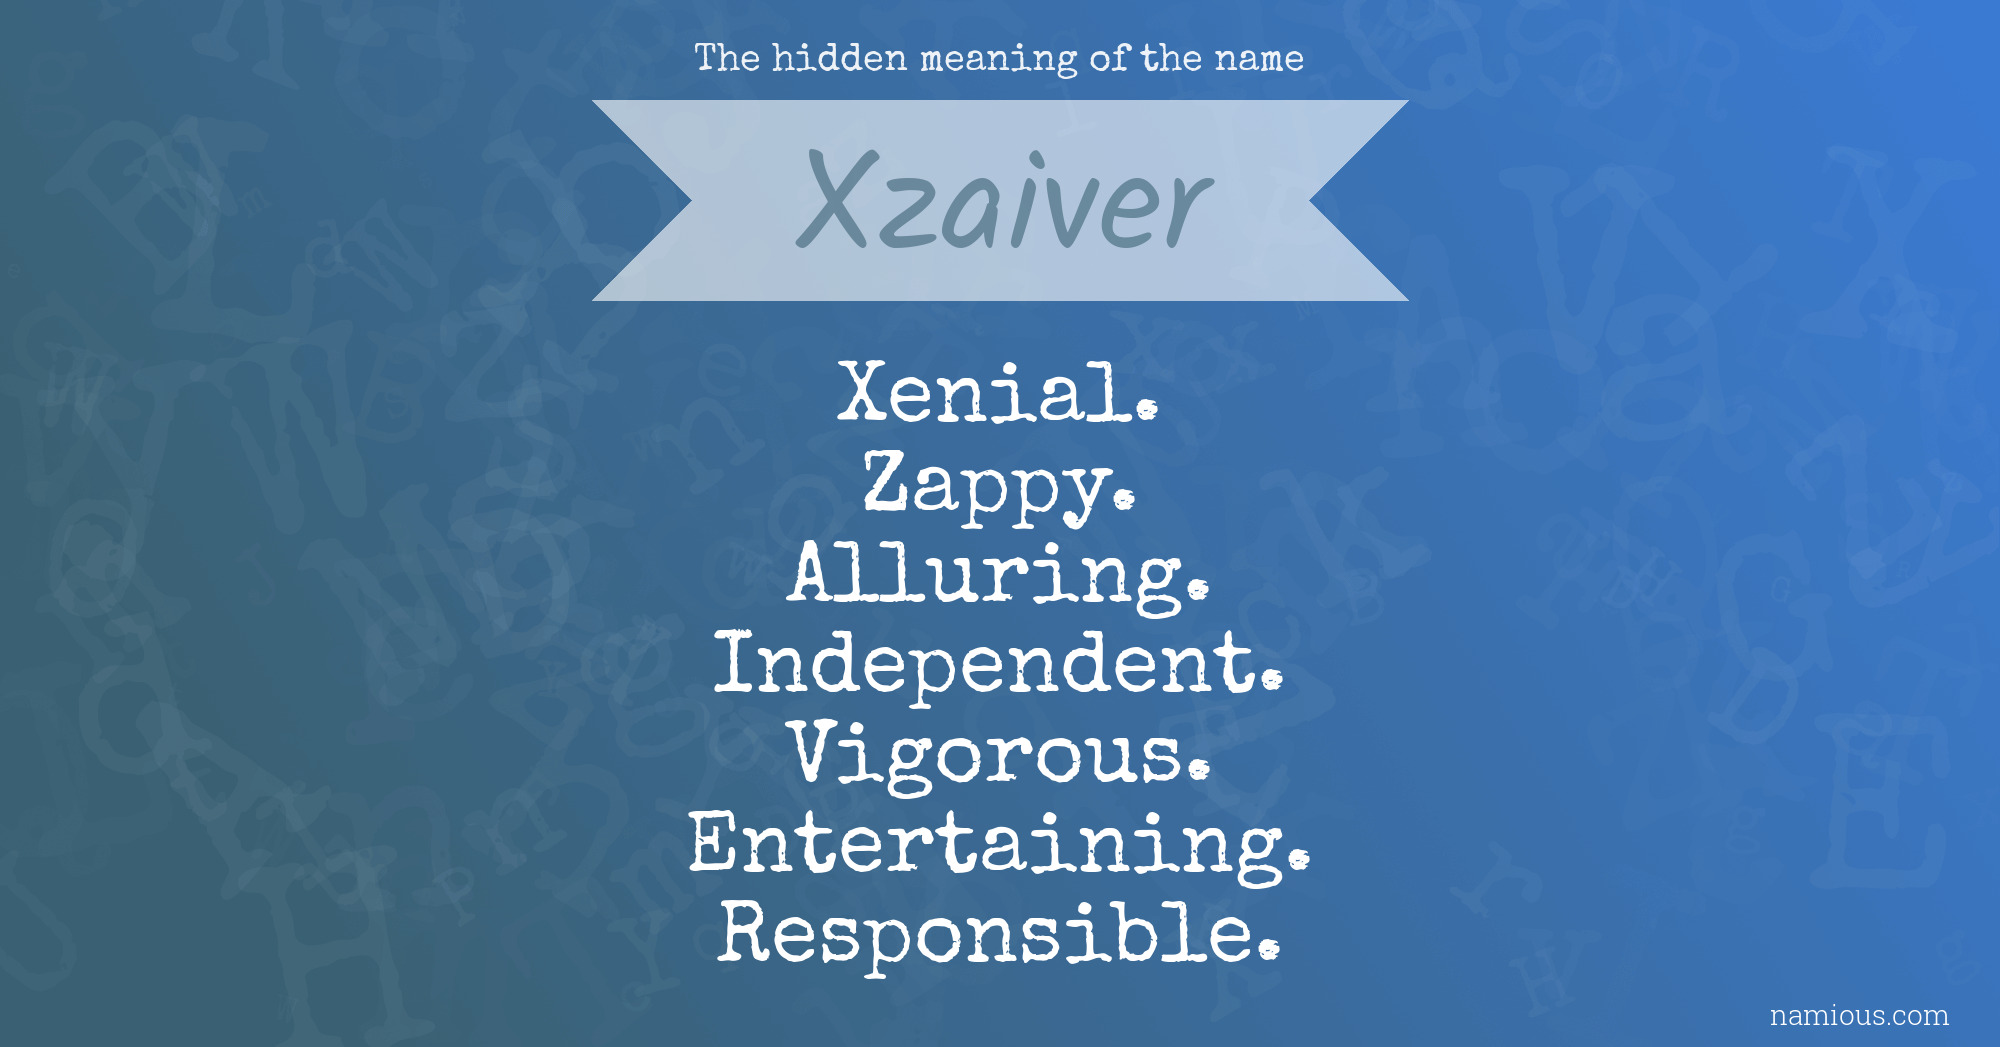 The hidden meaning of the name Xzaiver